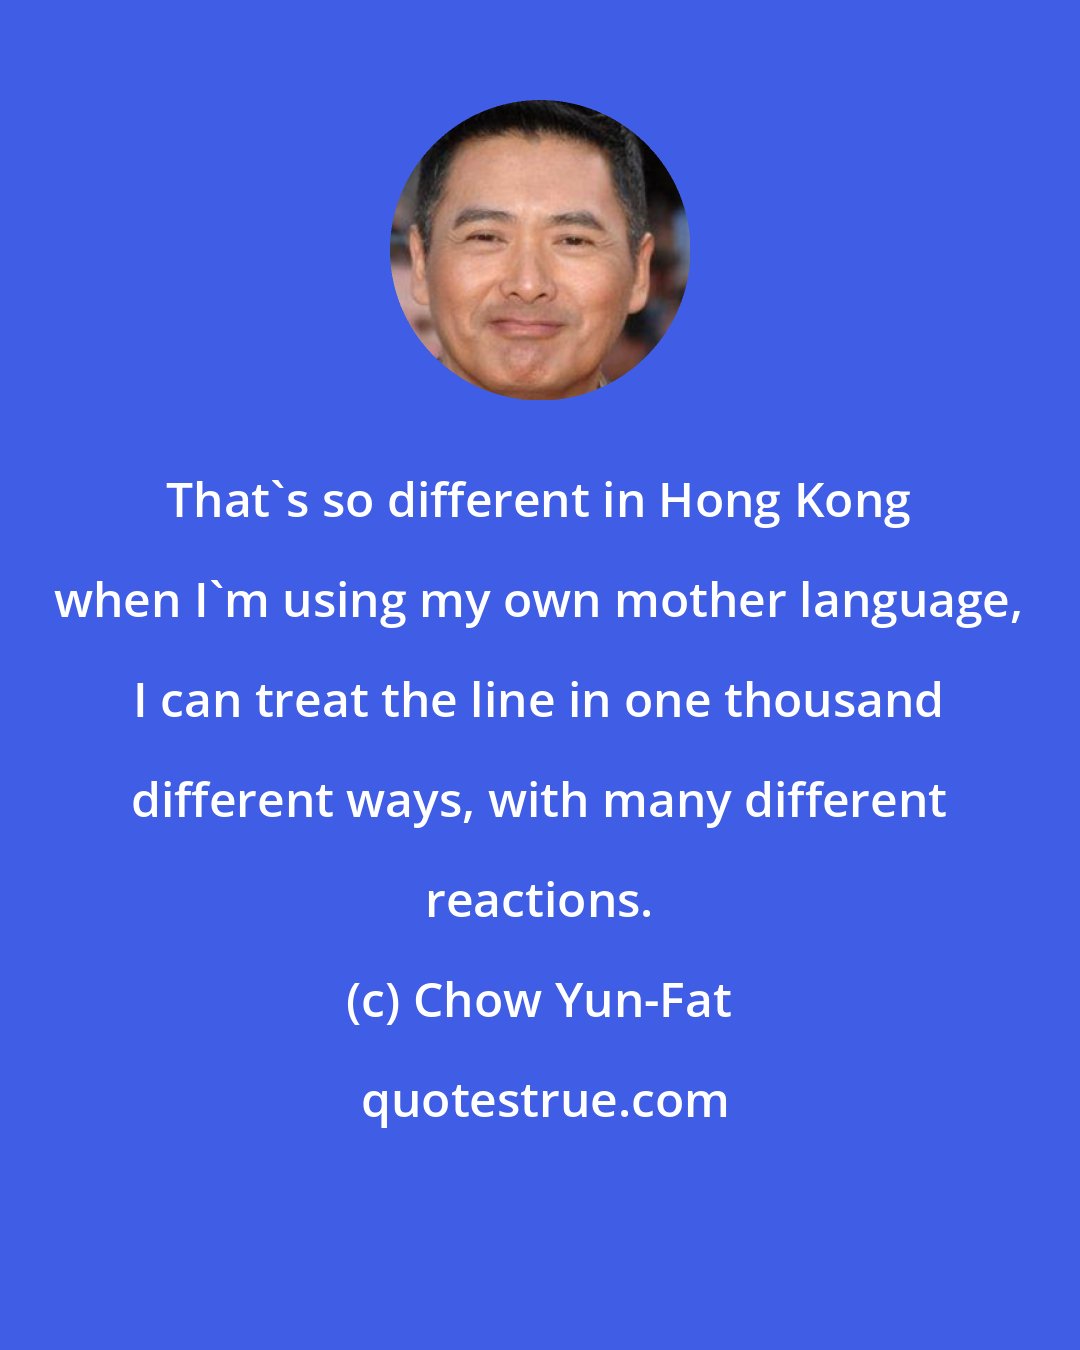 Chow Yun-Fat: That's so different in Hong Kong when I'm using my own mother language, I can treat the line in one thousand different ways, with many different reactions.